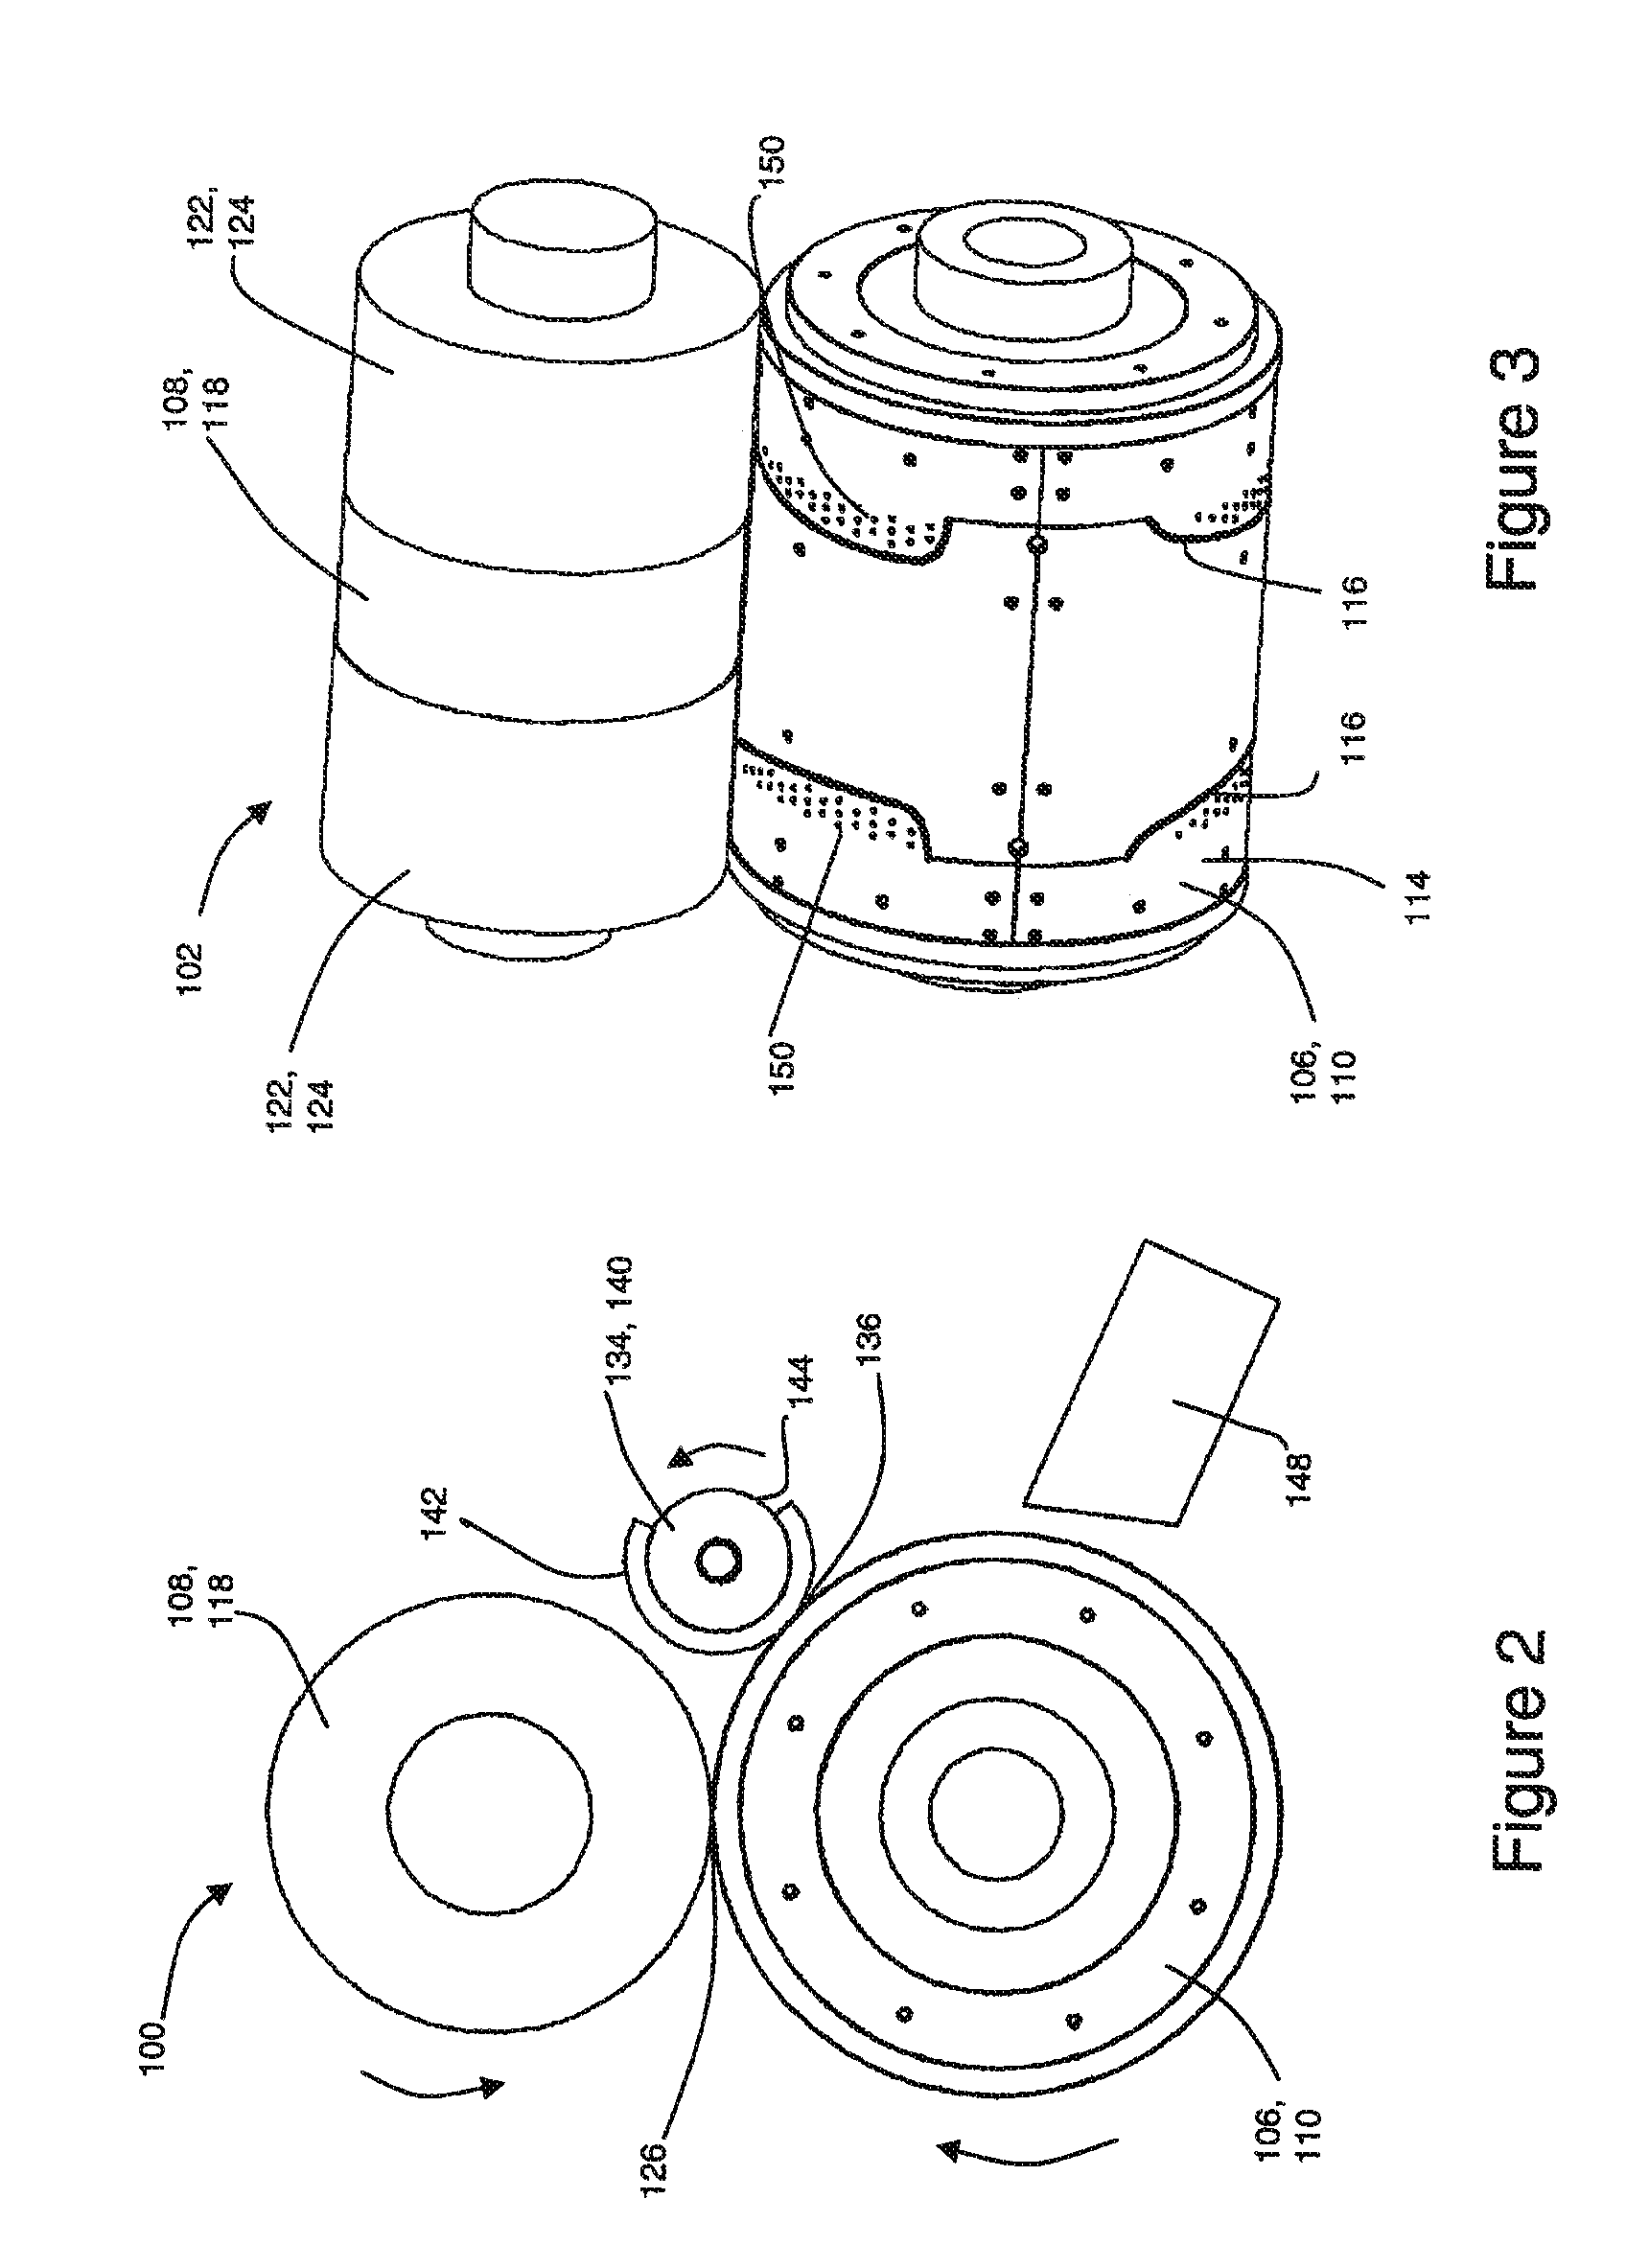 Absorbent Article Substrate Trim Material Removal Process and Apparatus